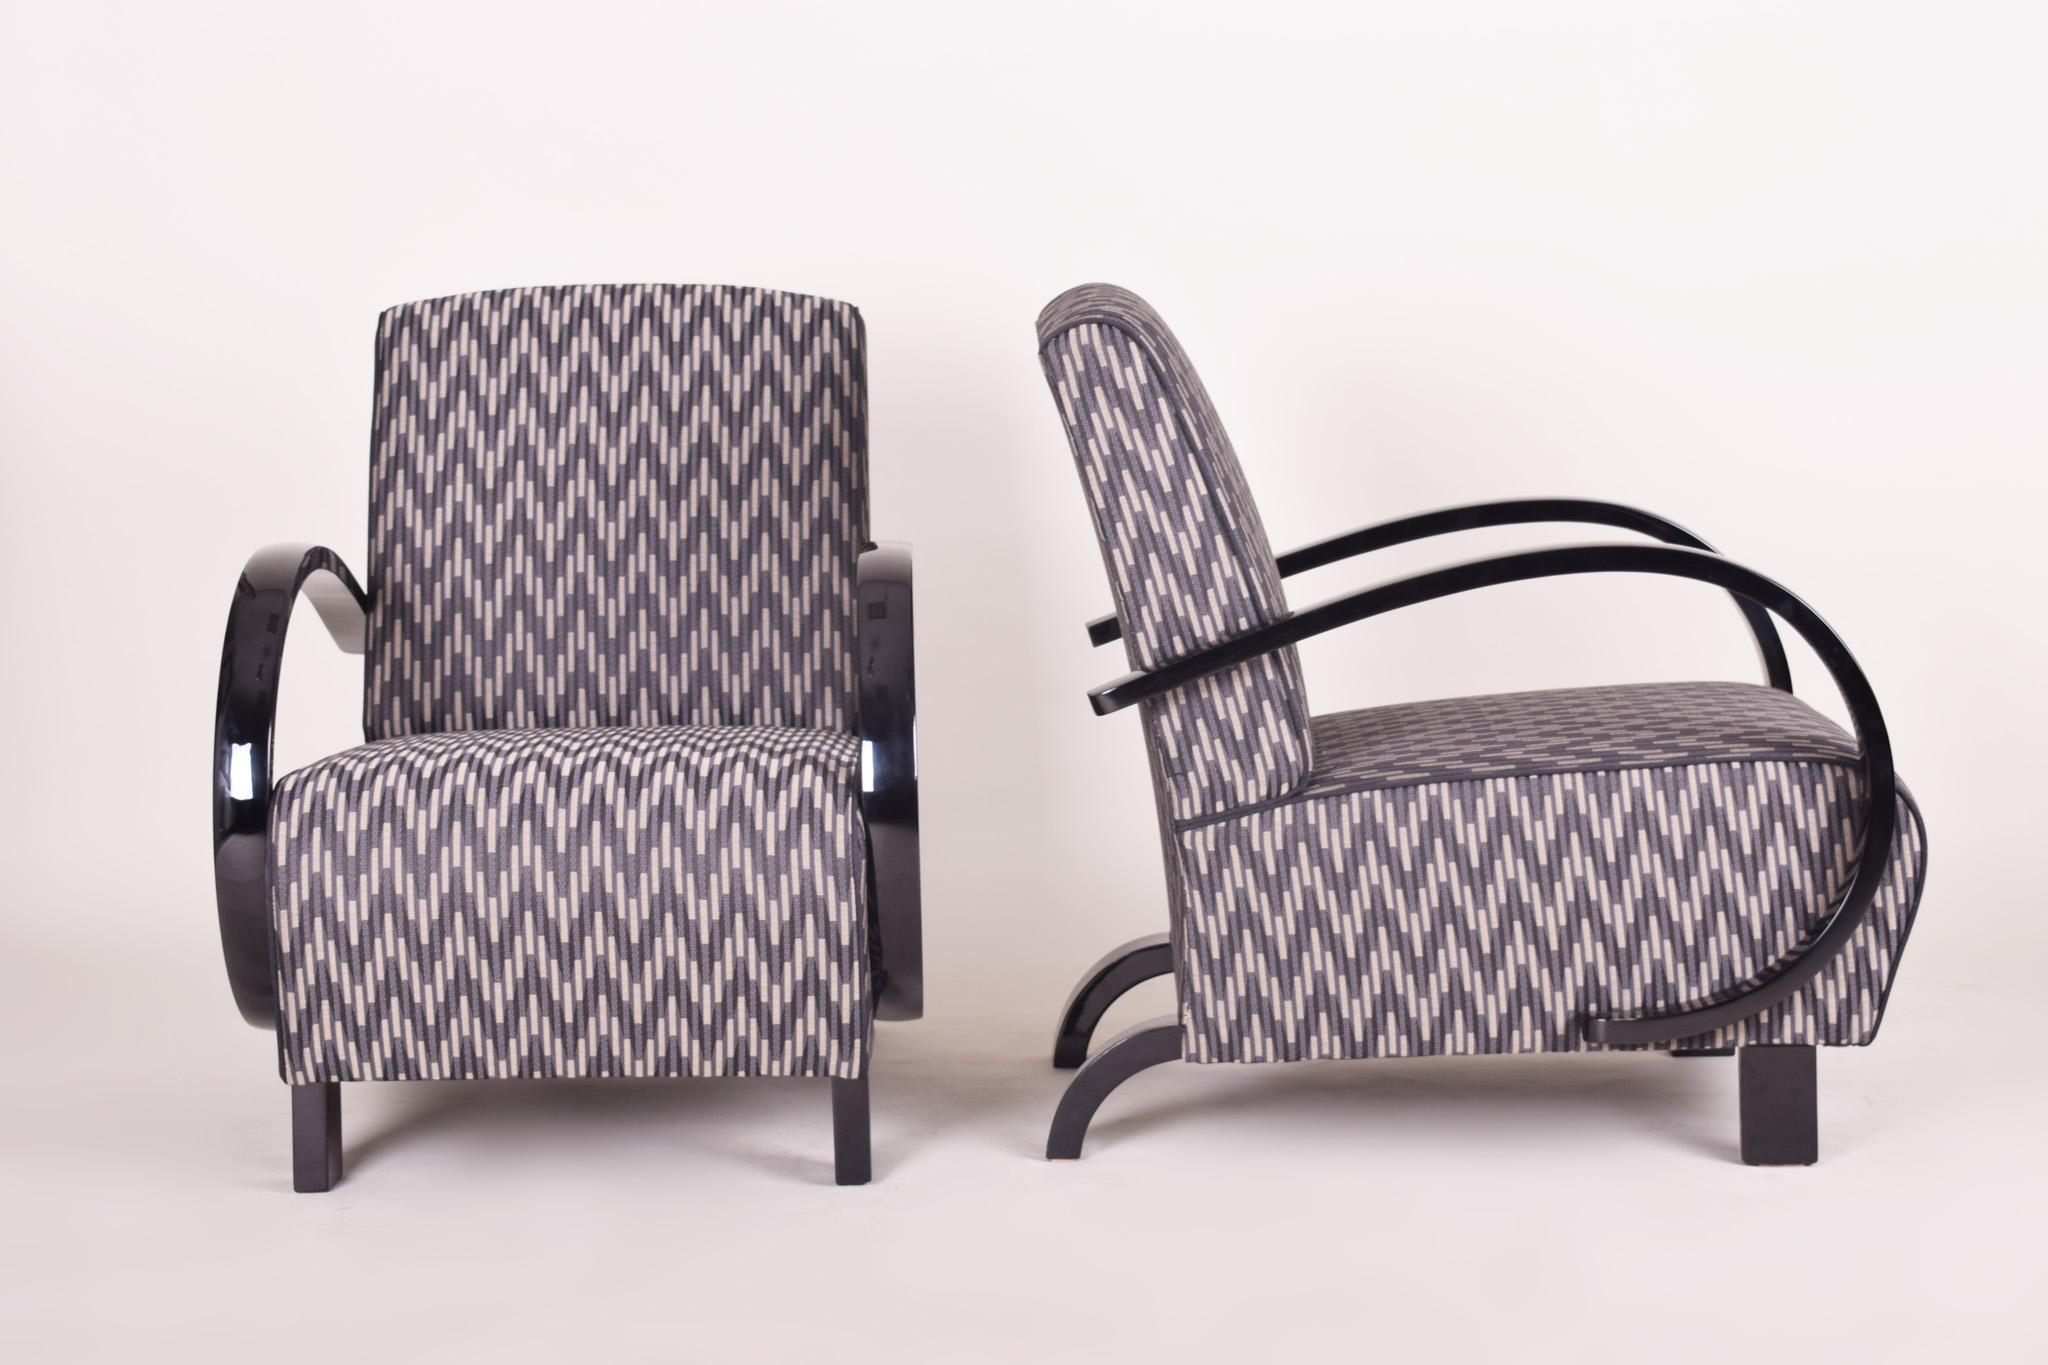 Pair of Art Deco armchairs

Source: Czechia (Czechoslovakia)
Period: 1930-1939
Material: Beech, high gloss black lacquer 
Completaly restored. New upholstery.